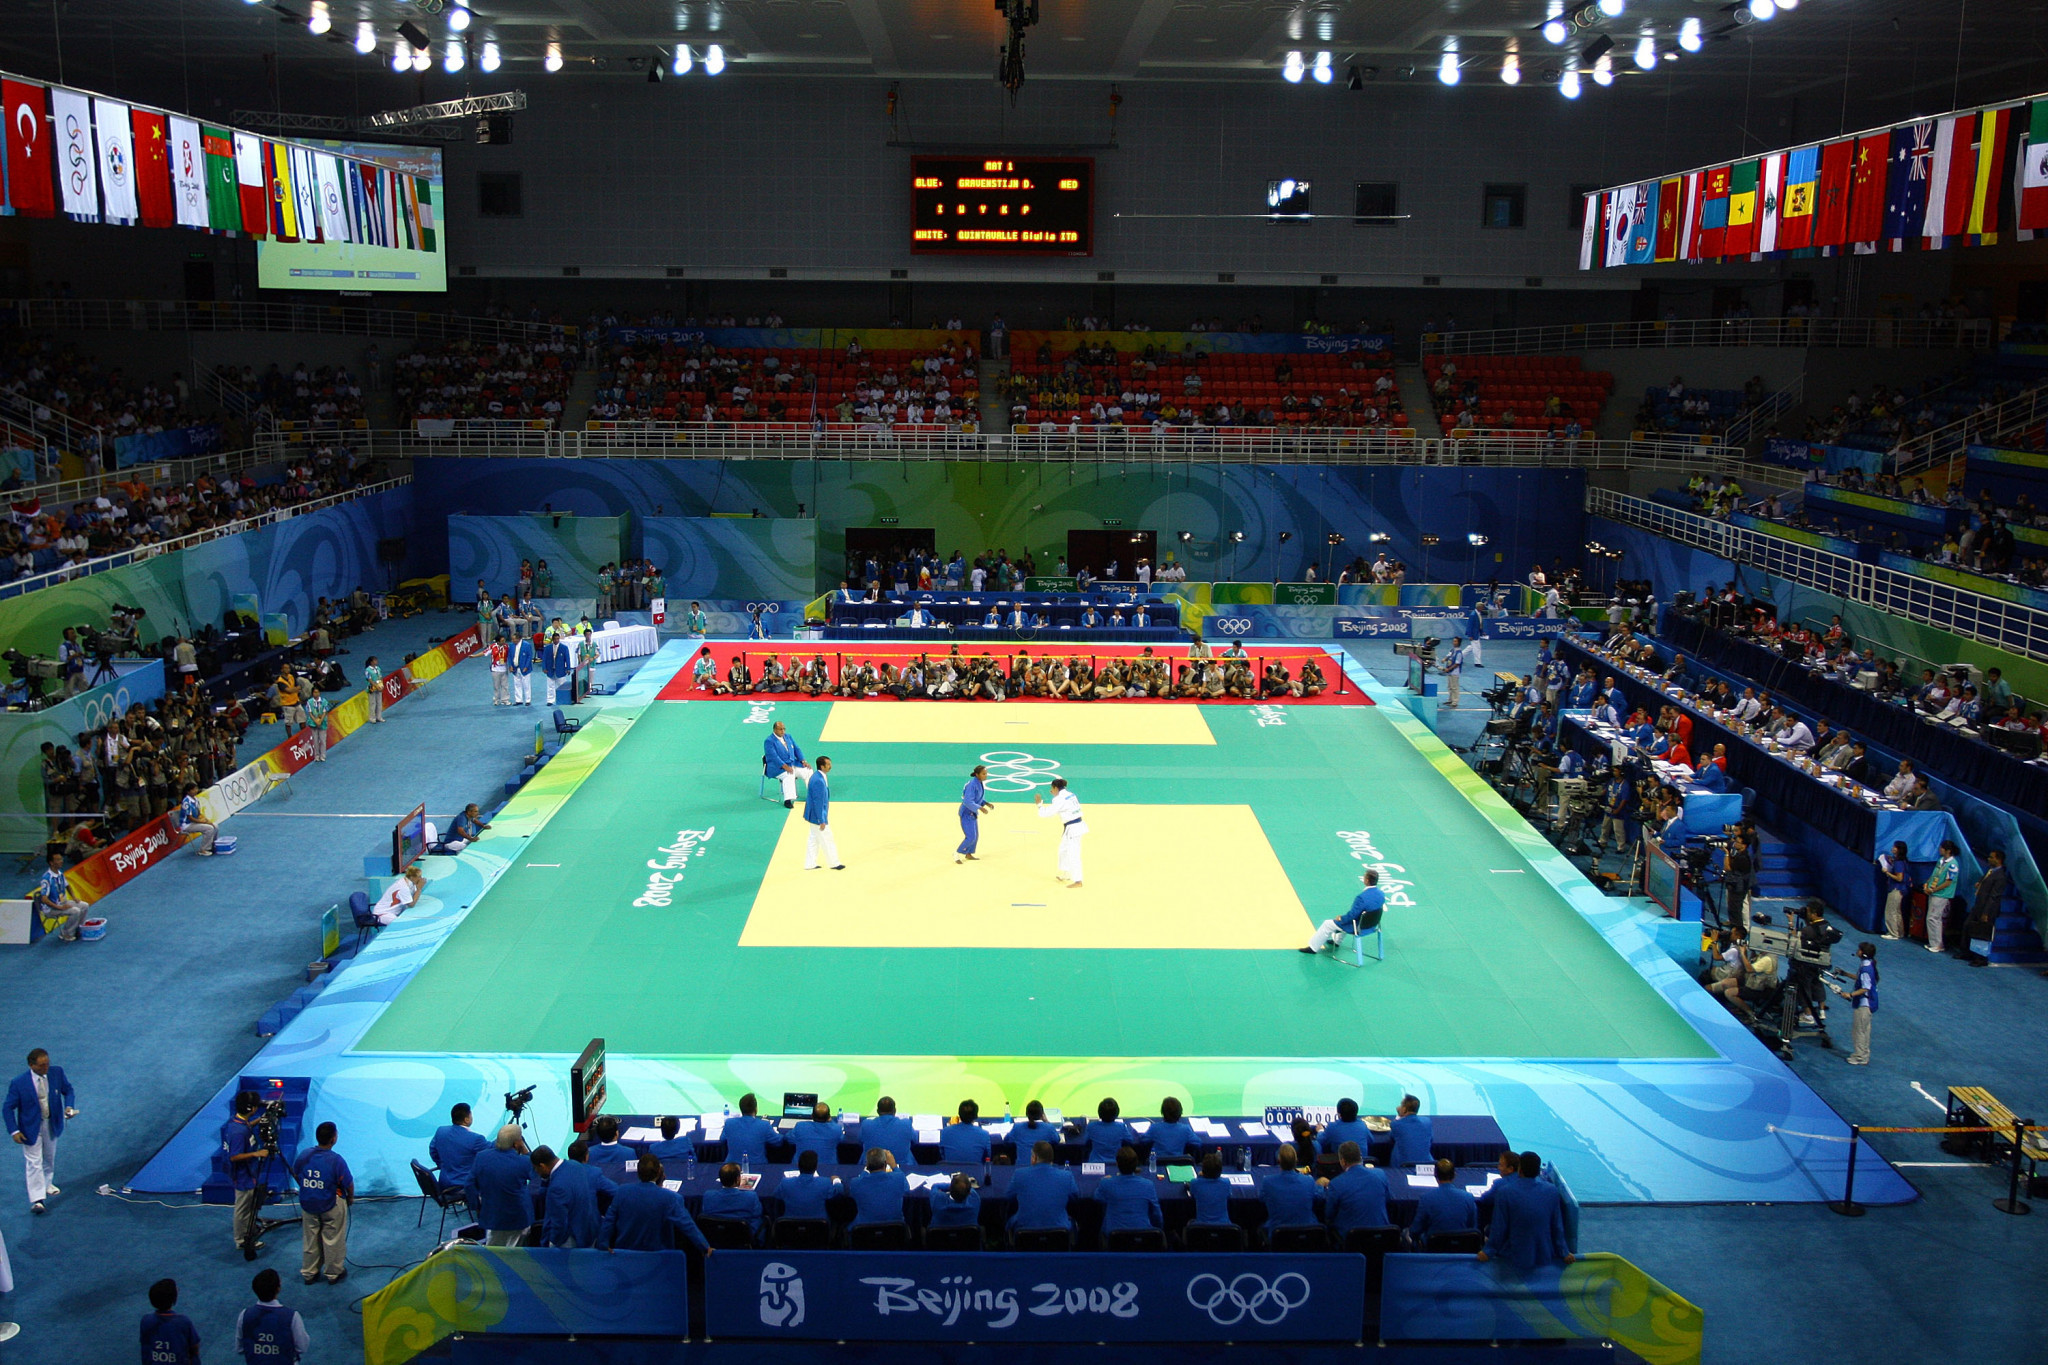 Maria Pekli (white) of Australia fights against Ketleyn Quadros of Brazil during the Women's 57 kg Judo event at the University of Science and Technology Beijing Gymnasium on Day 3 of the Beijing 2008 Olympic Games ©Getty Images